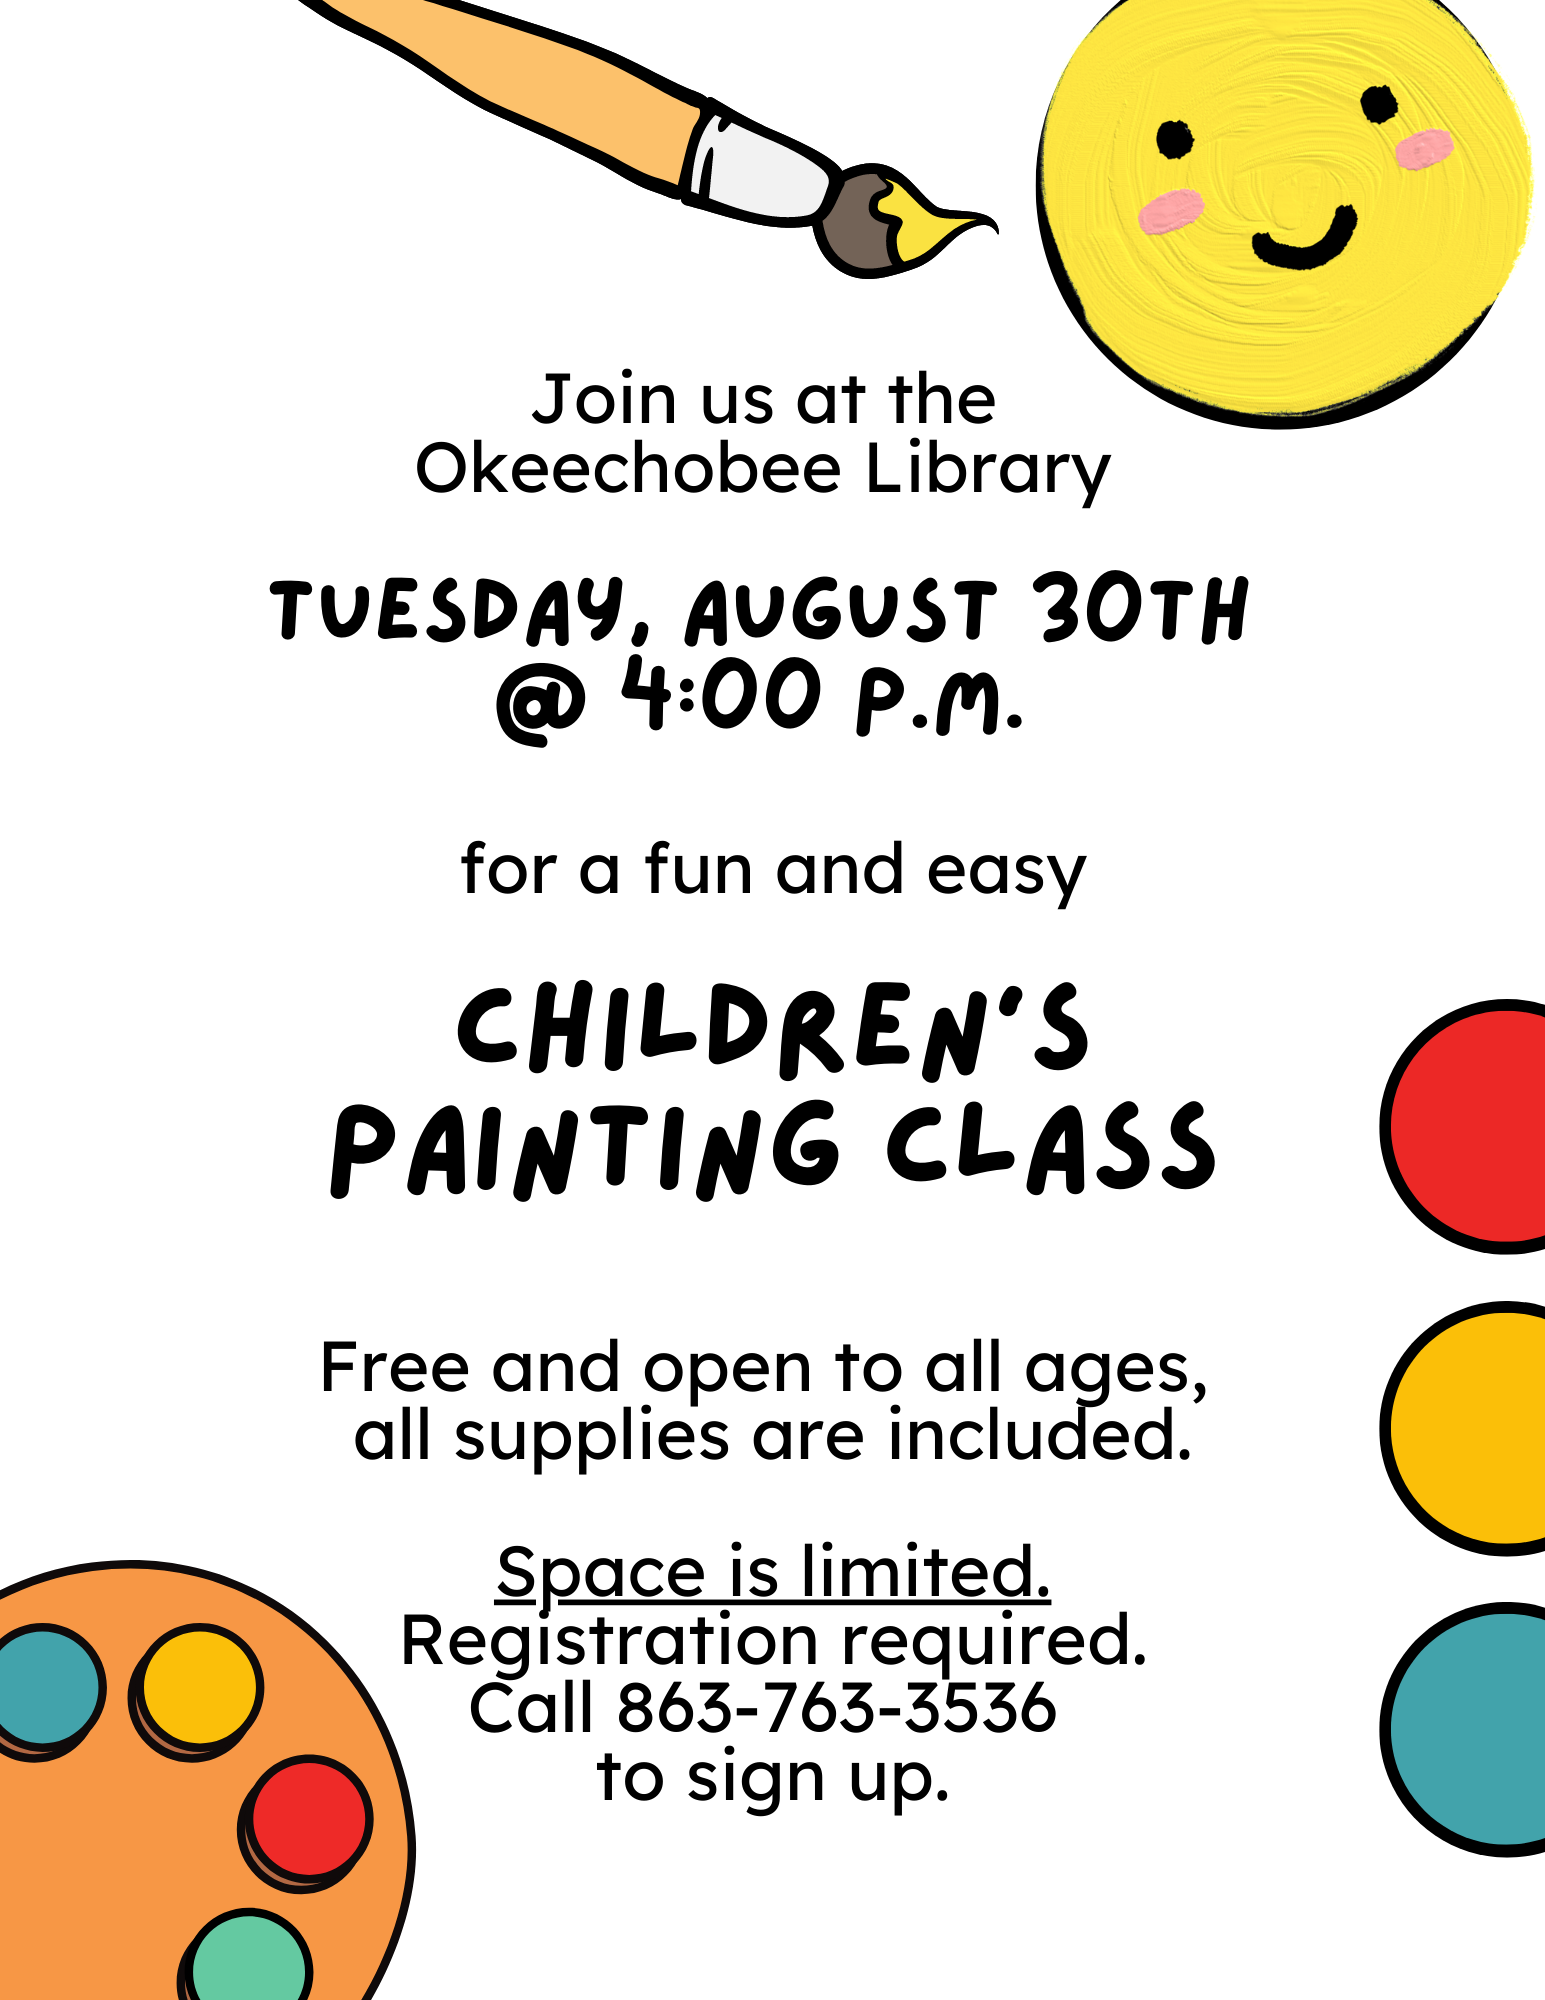 Join us Tuesday, August 30th at 4pm for FREE! This event is open to all ages and all supplies are included.*SPACE IS LIMITED* REGISTRATION REQUIRED. Call 863-763-3536 to sign up!